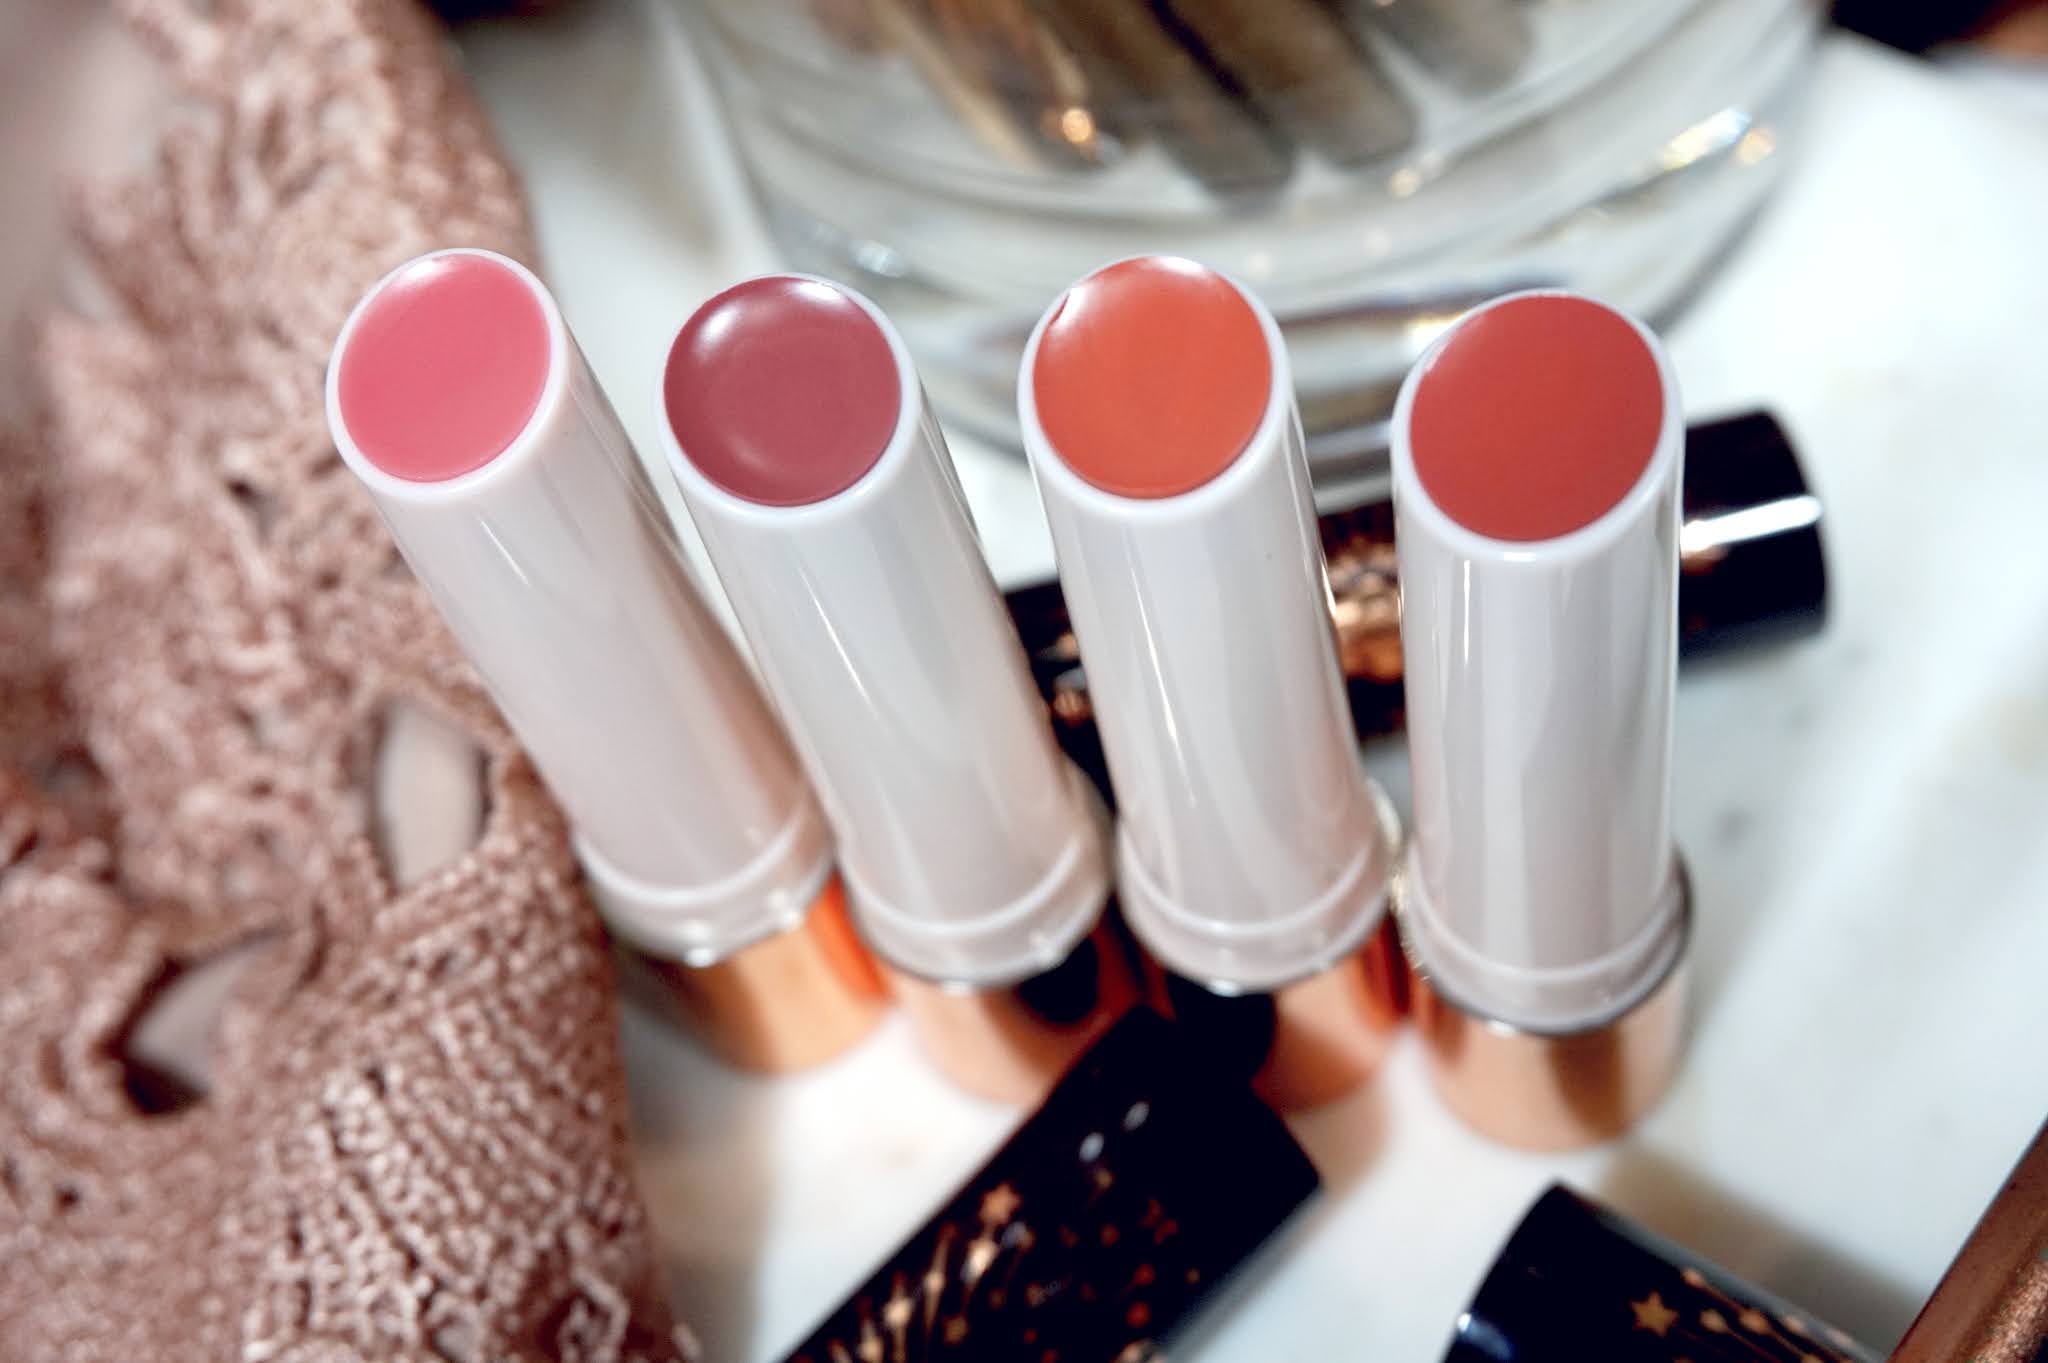 Charlotte Tilbury Hyaluronic HappiKiss Hydrating Lipstick Balms Review and Swatches